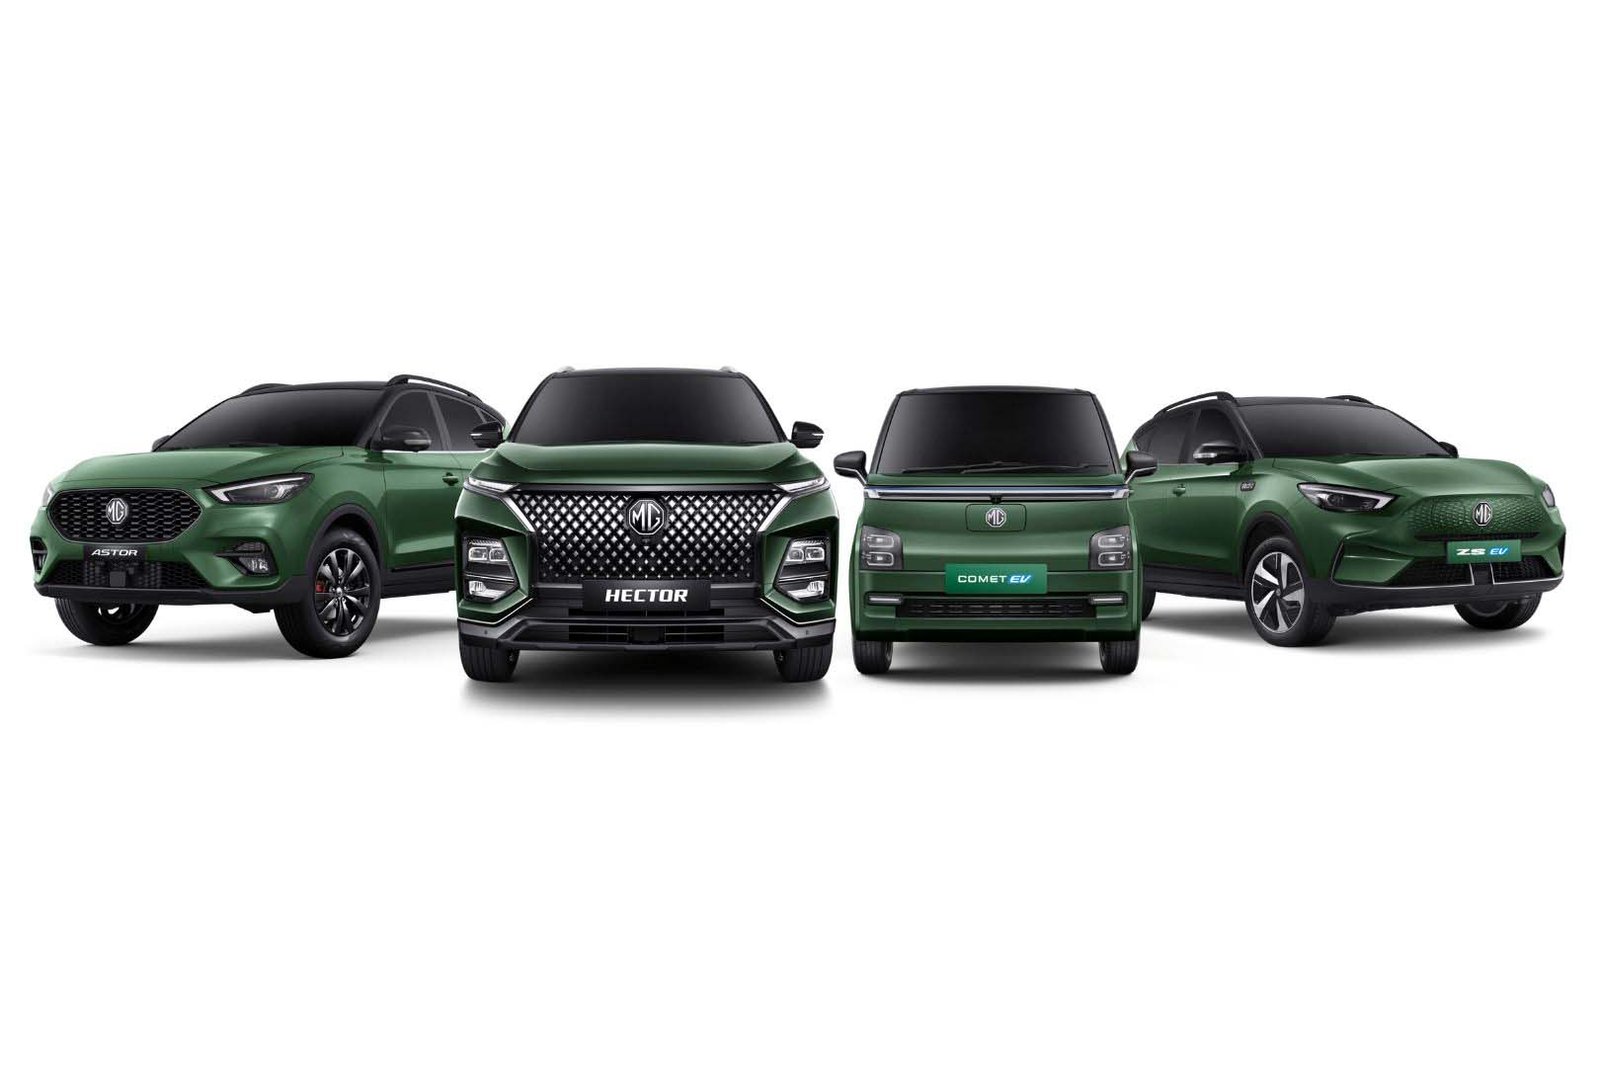 MG Company launches new Evergreen Editions of Comet, Aster, Hector and ZS EV on completion of 100 years